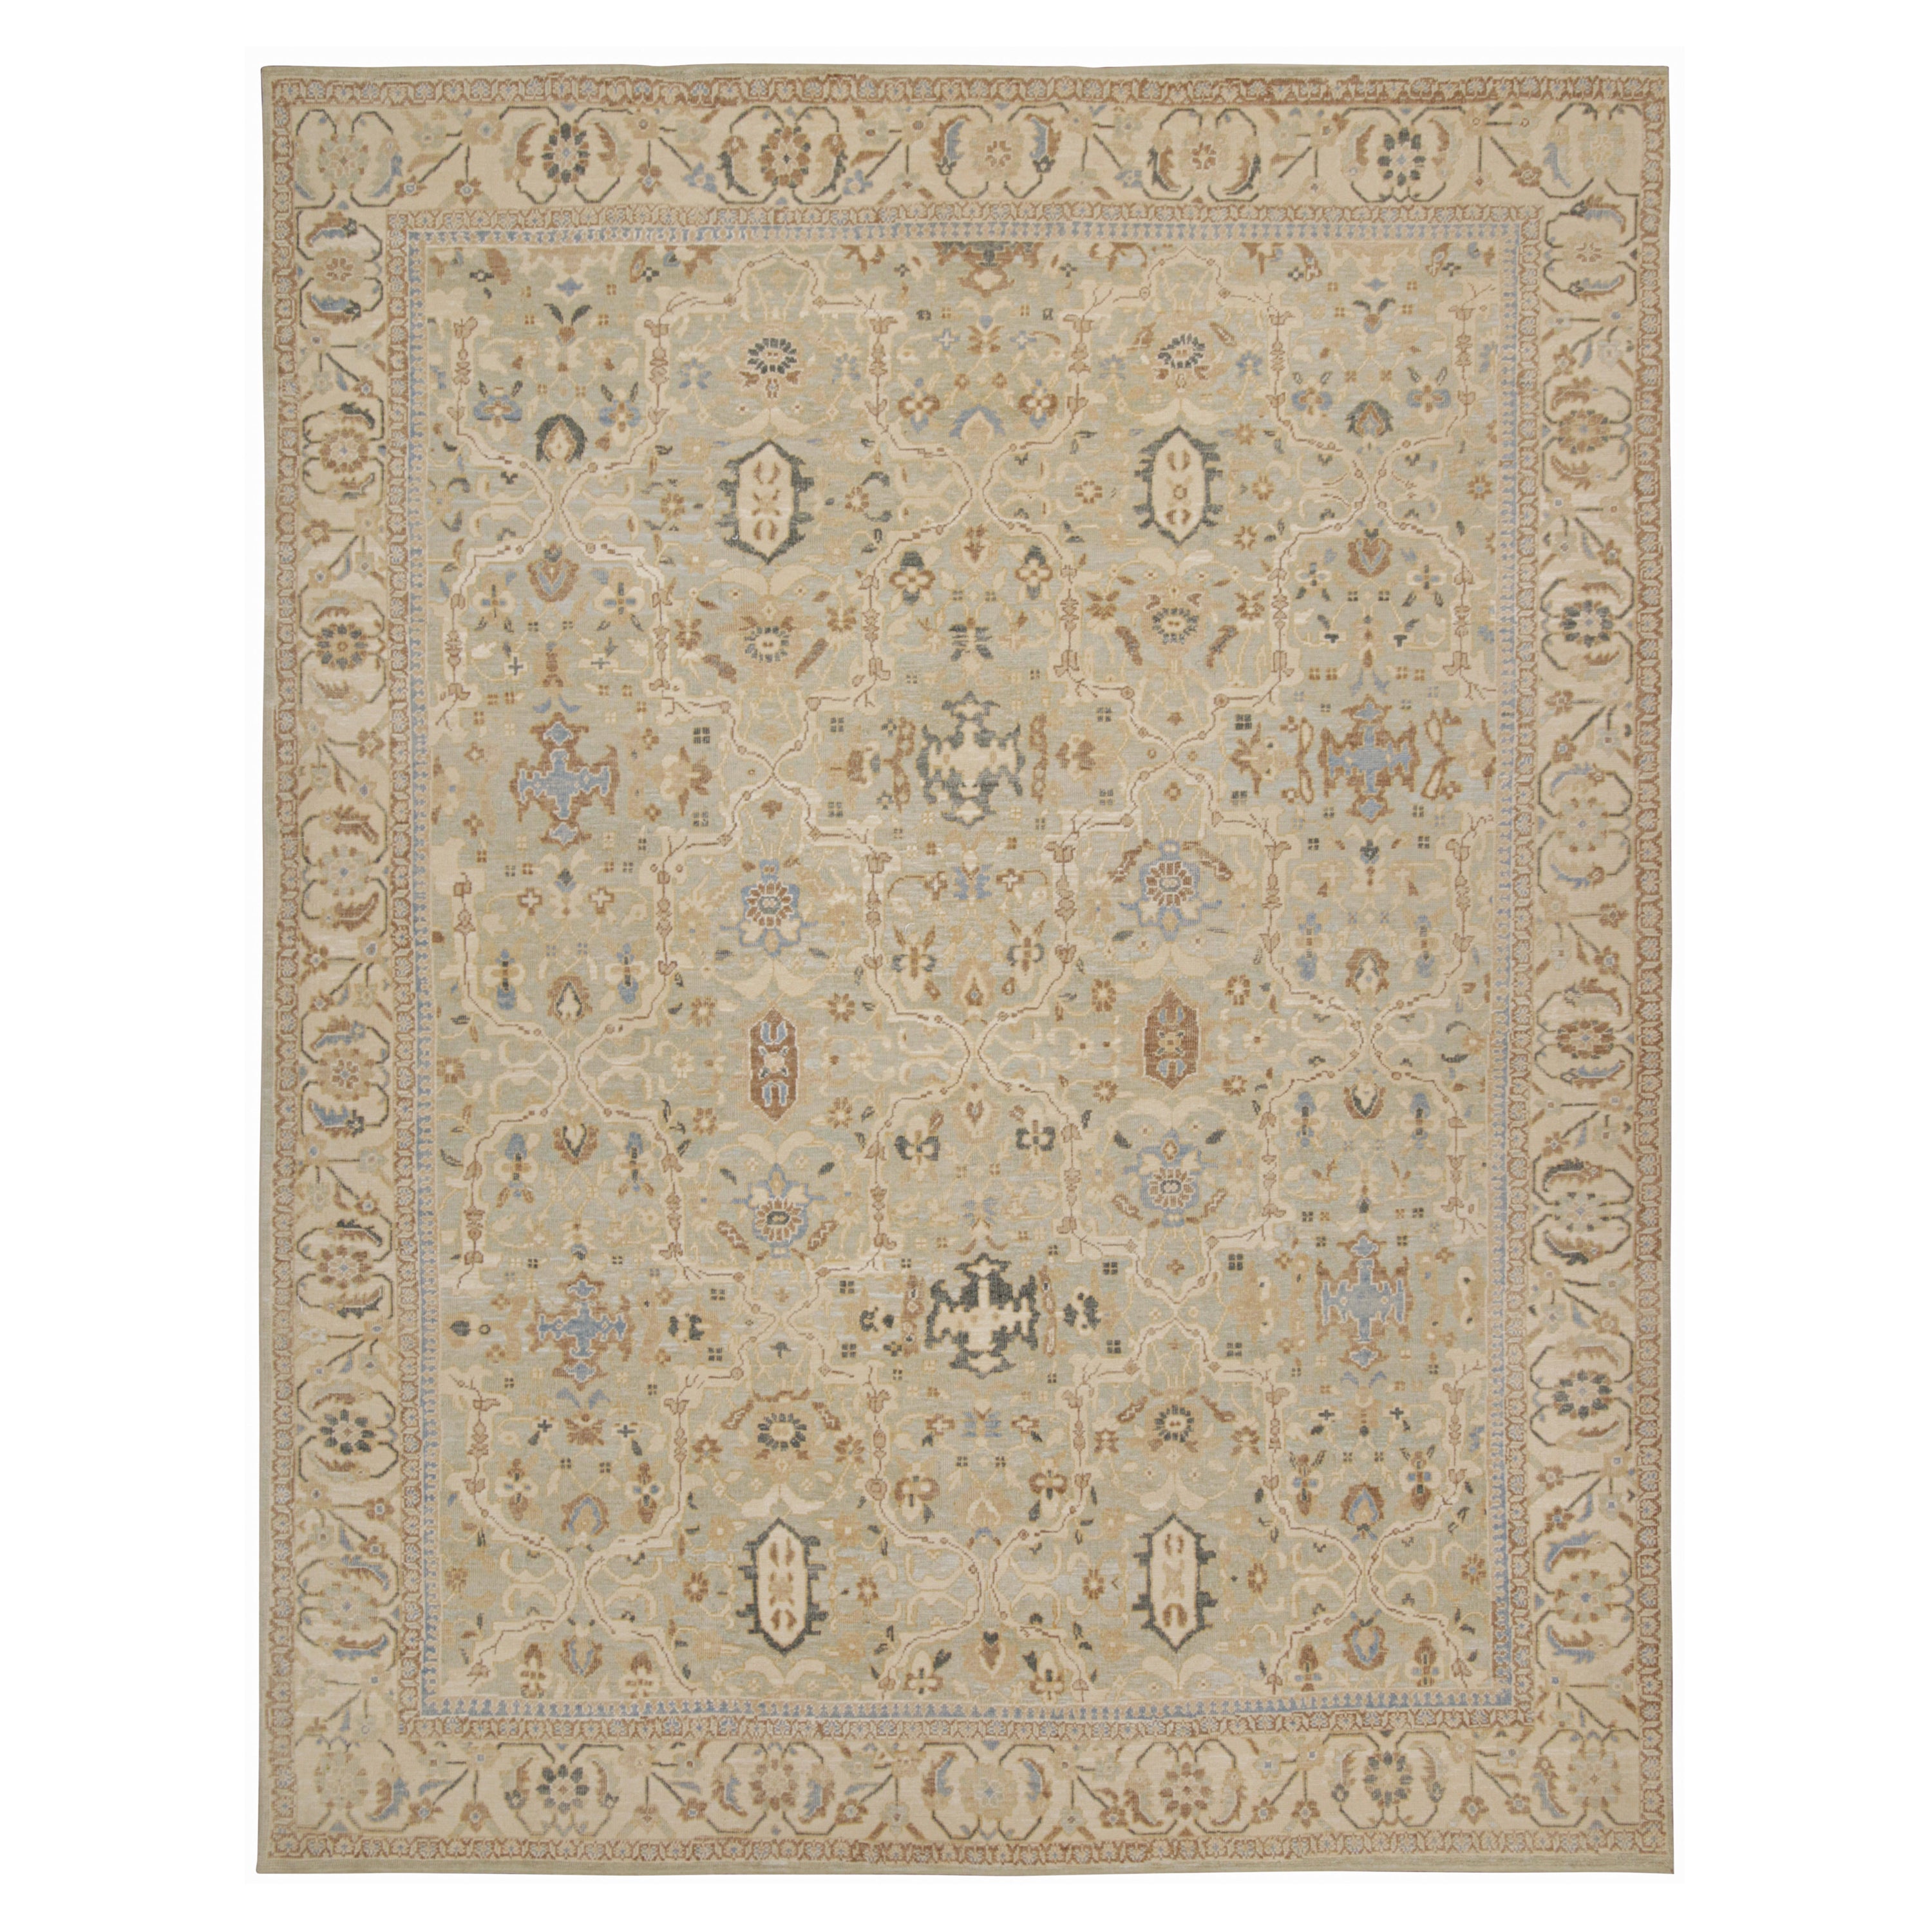 Rug & Kilim’s Oushak Style Rug in Blue and Beige-Brown Floral Patterns